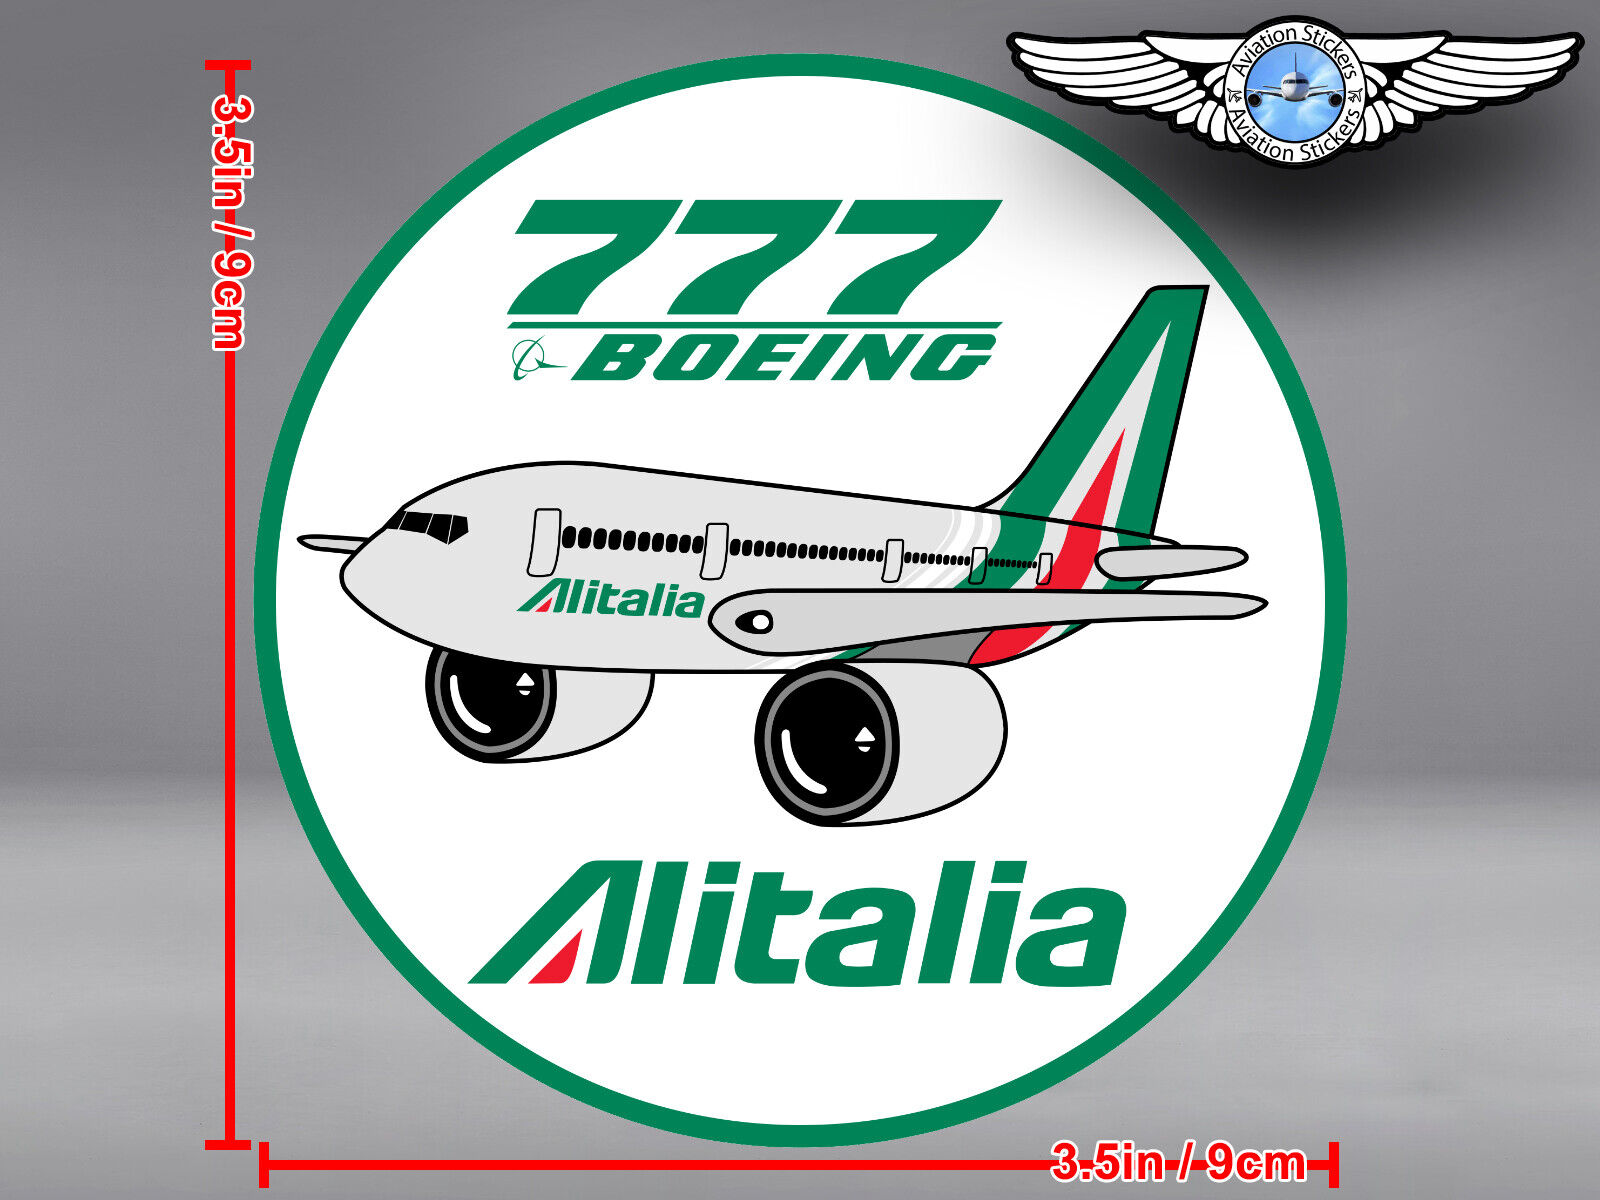 ALITALIA NEW LIVERY PUDGY BOEING B777 ROUND DECAL / STICKER